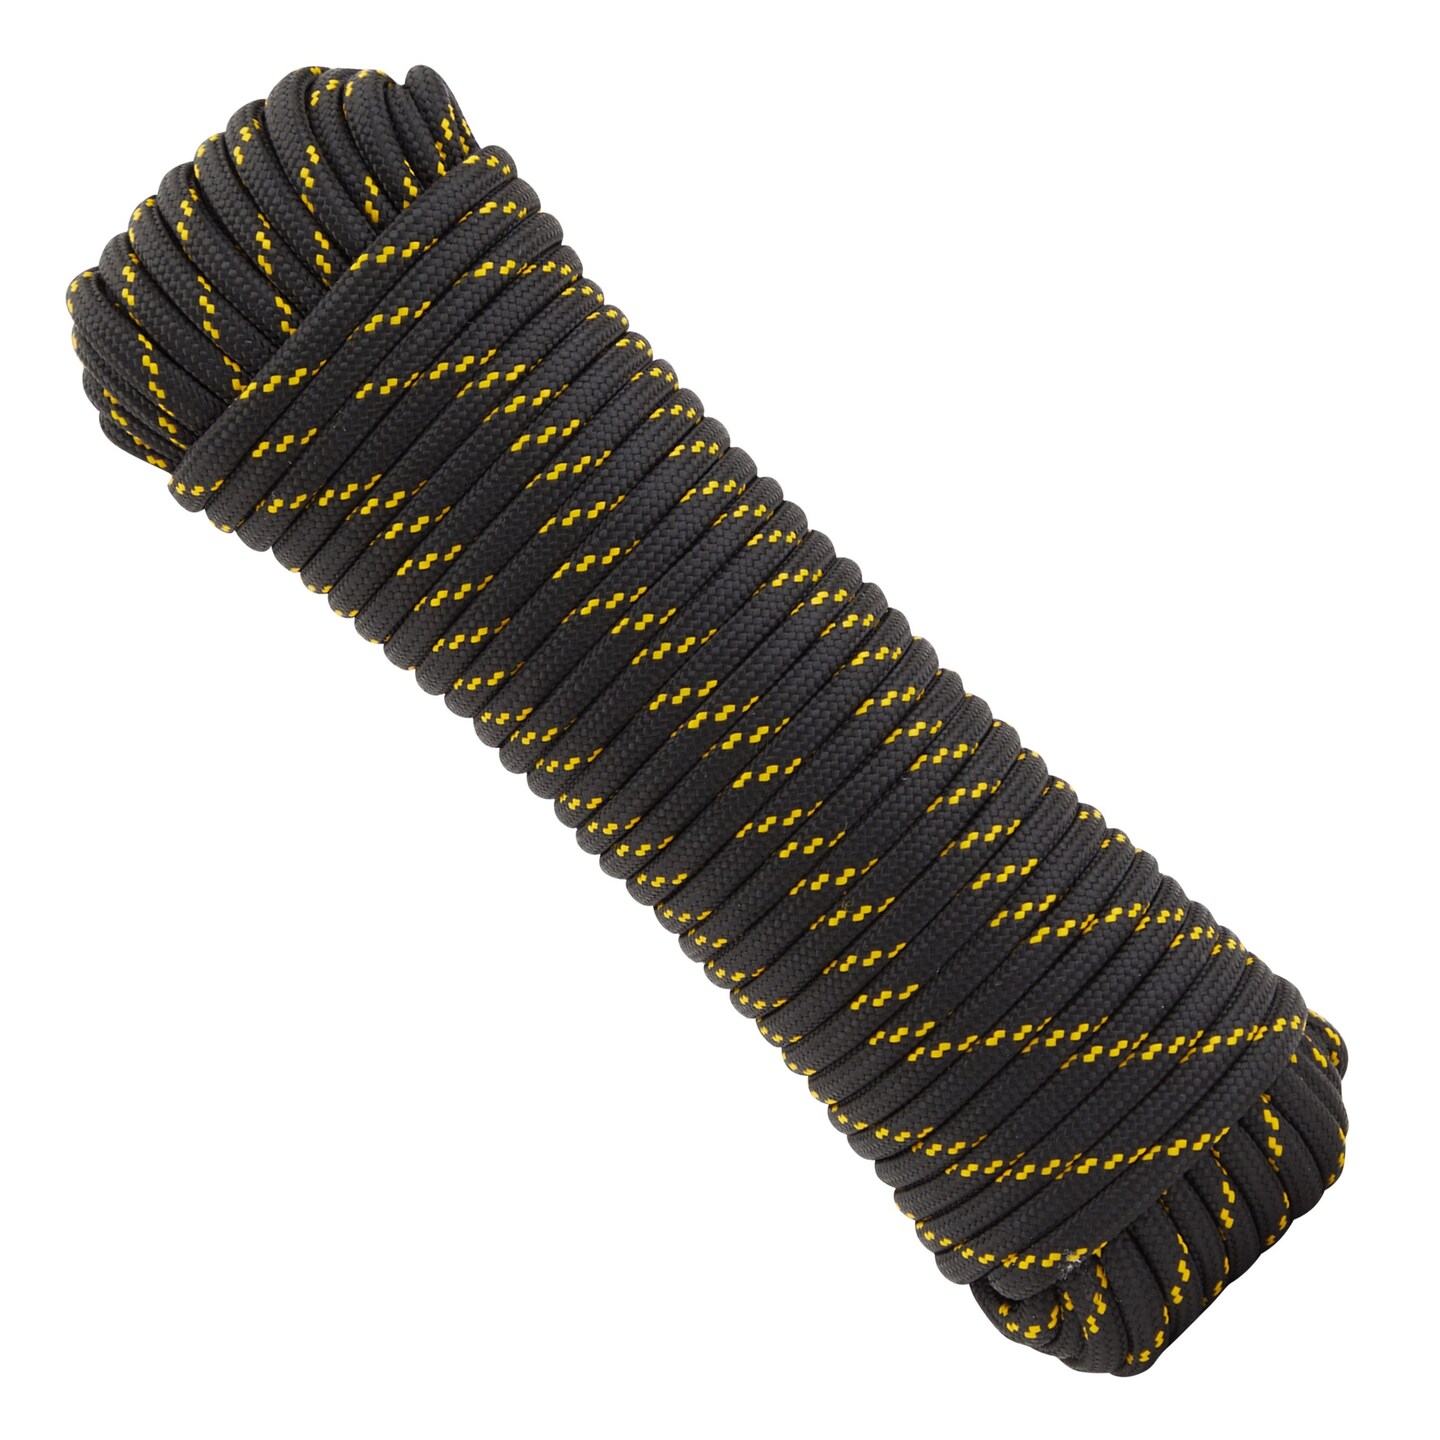 3/8 Inch x 100 Ft Braided Polyester Rope for Knot Tying Practice